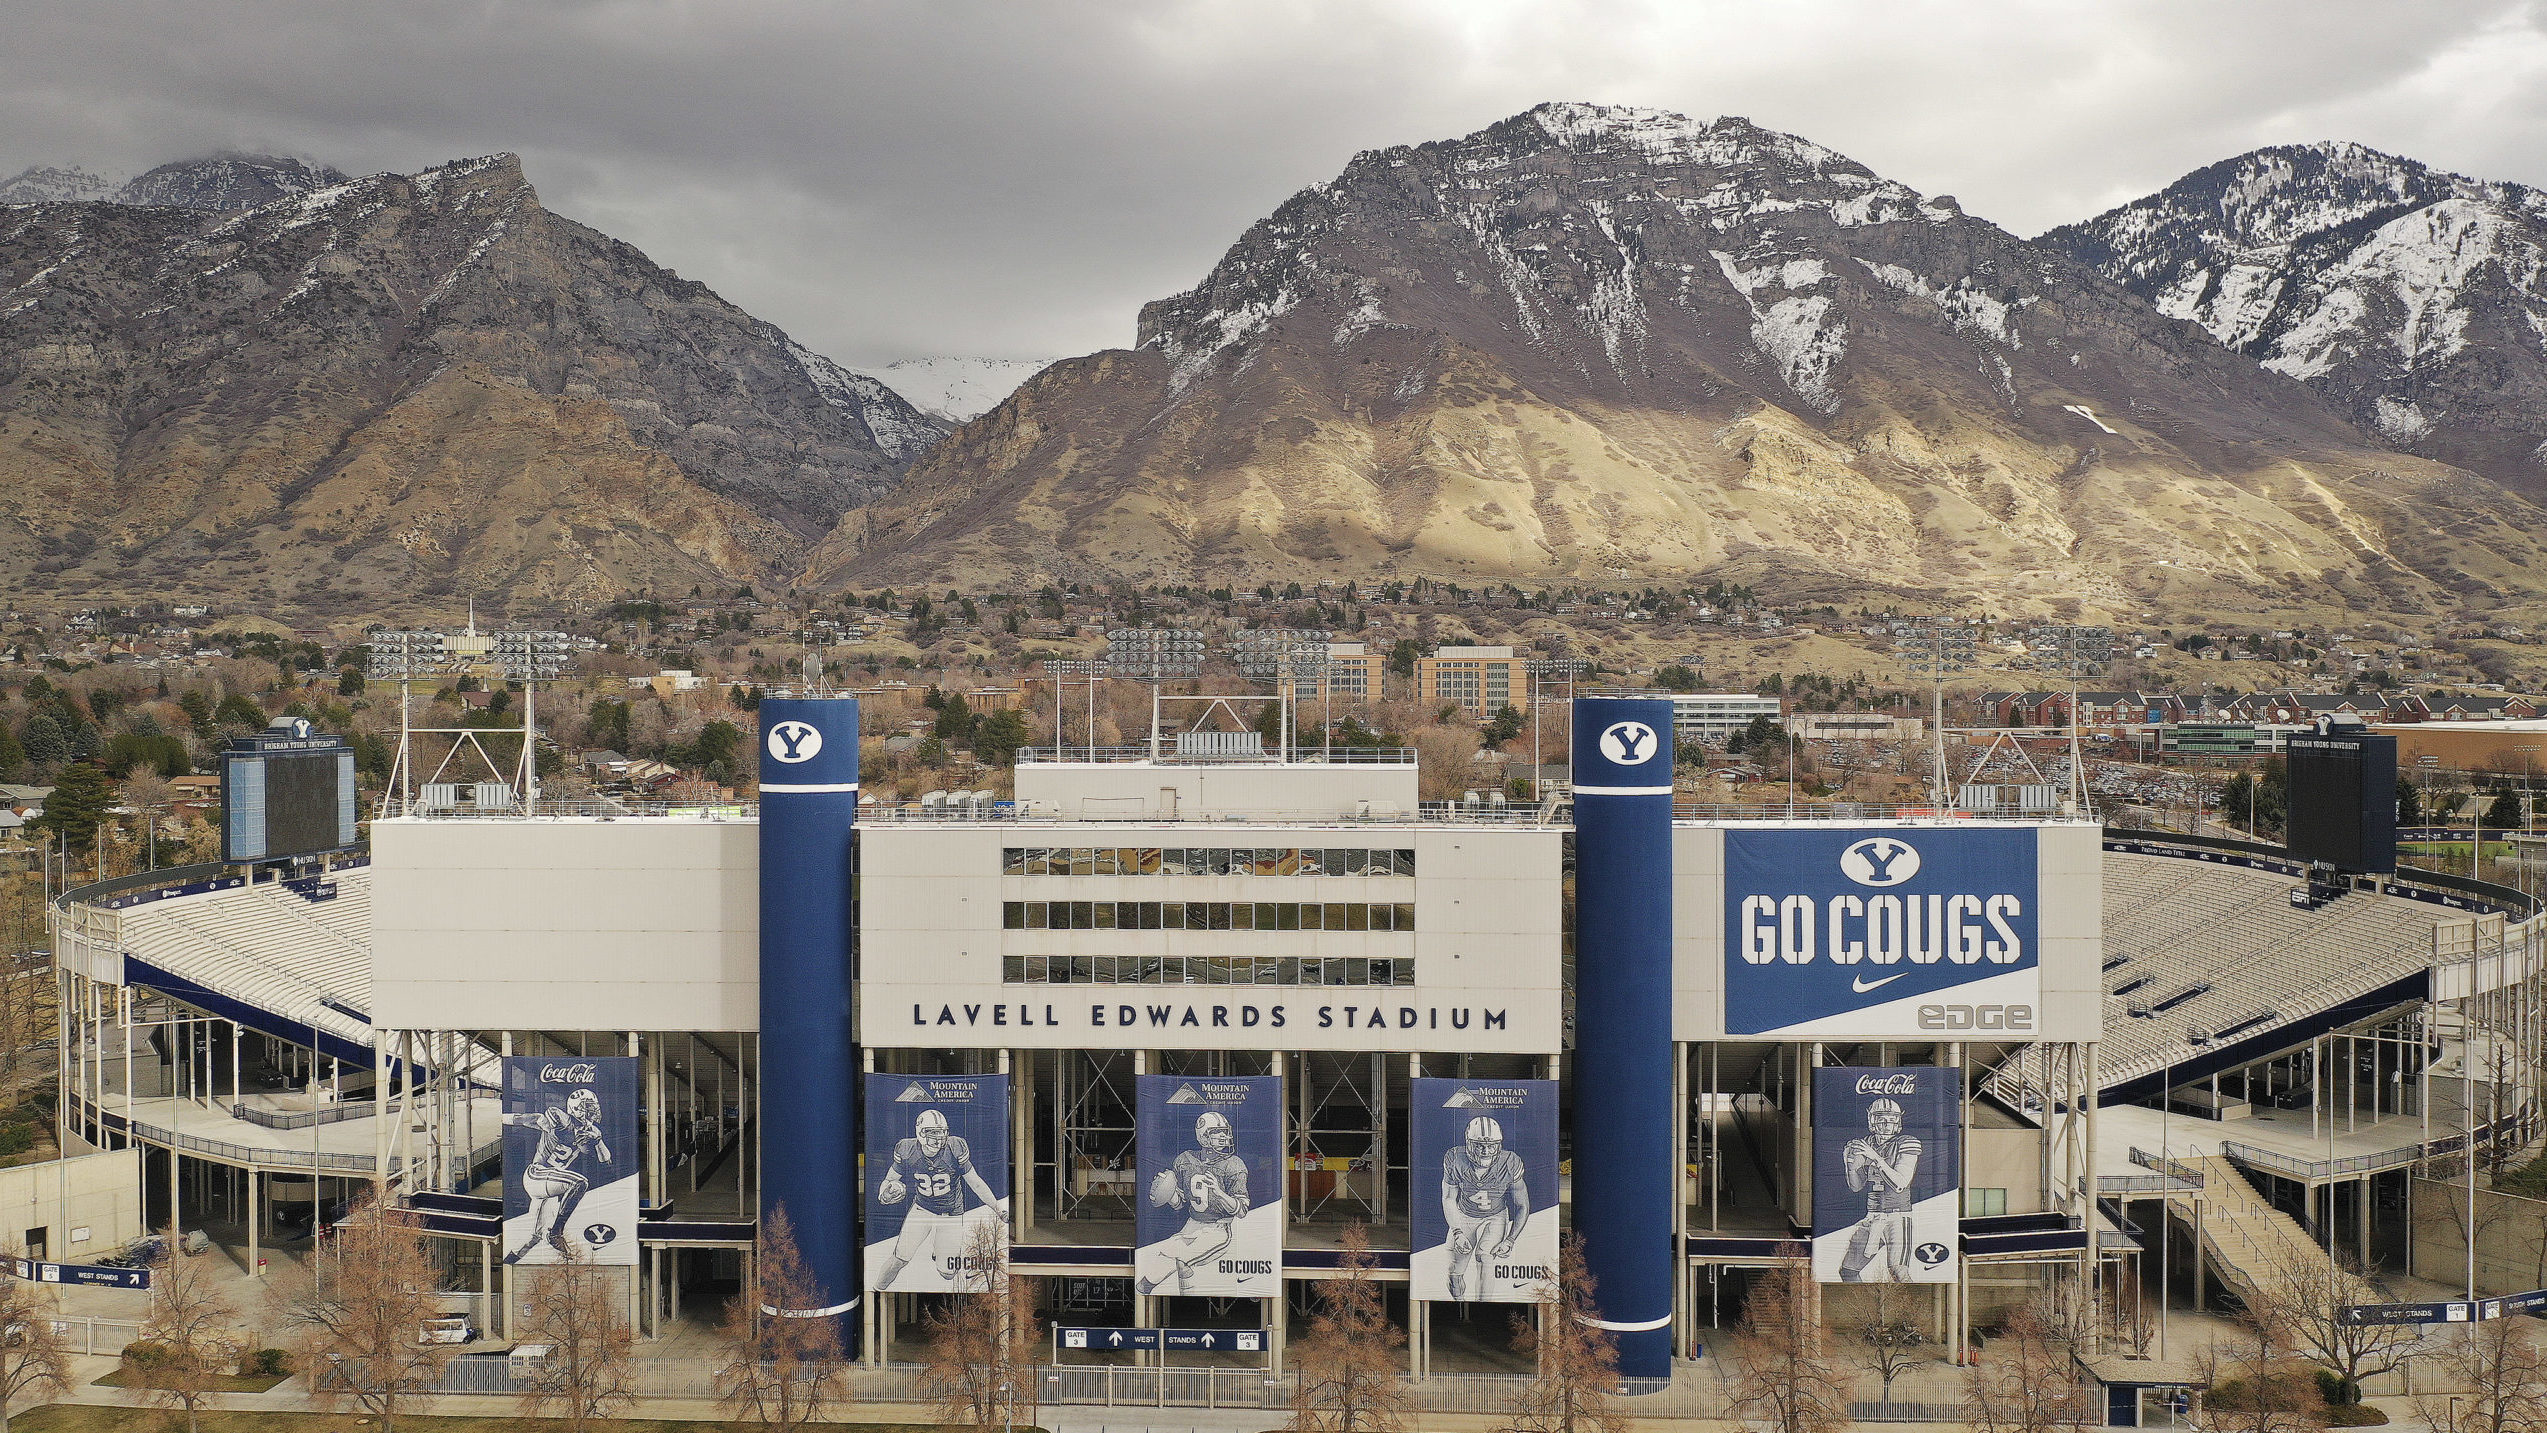 Provo wants better relationship with BYU students